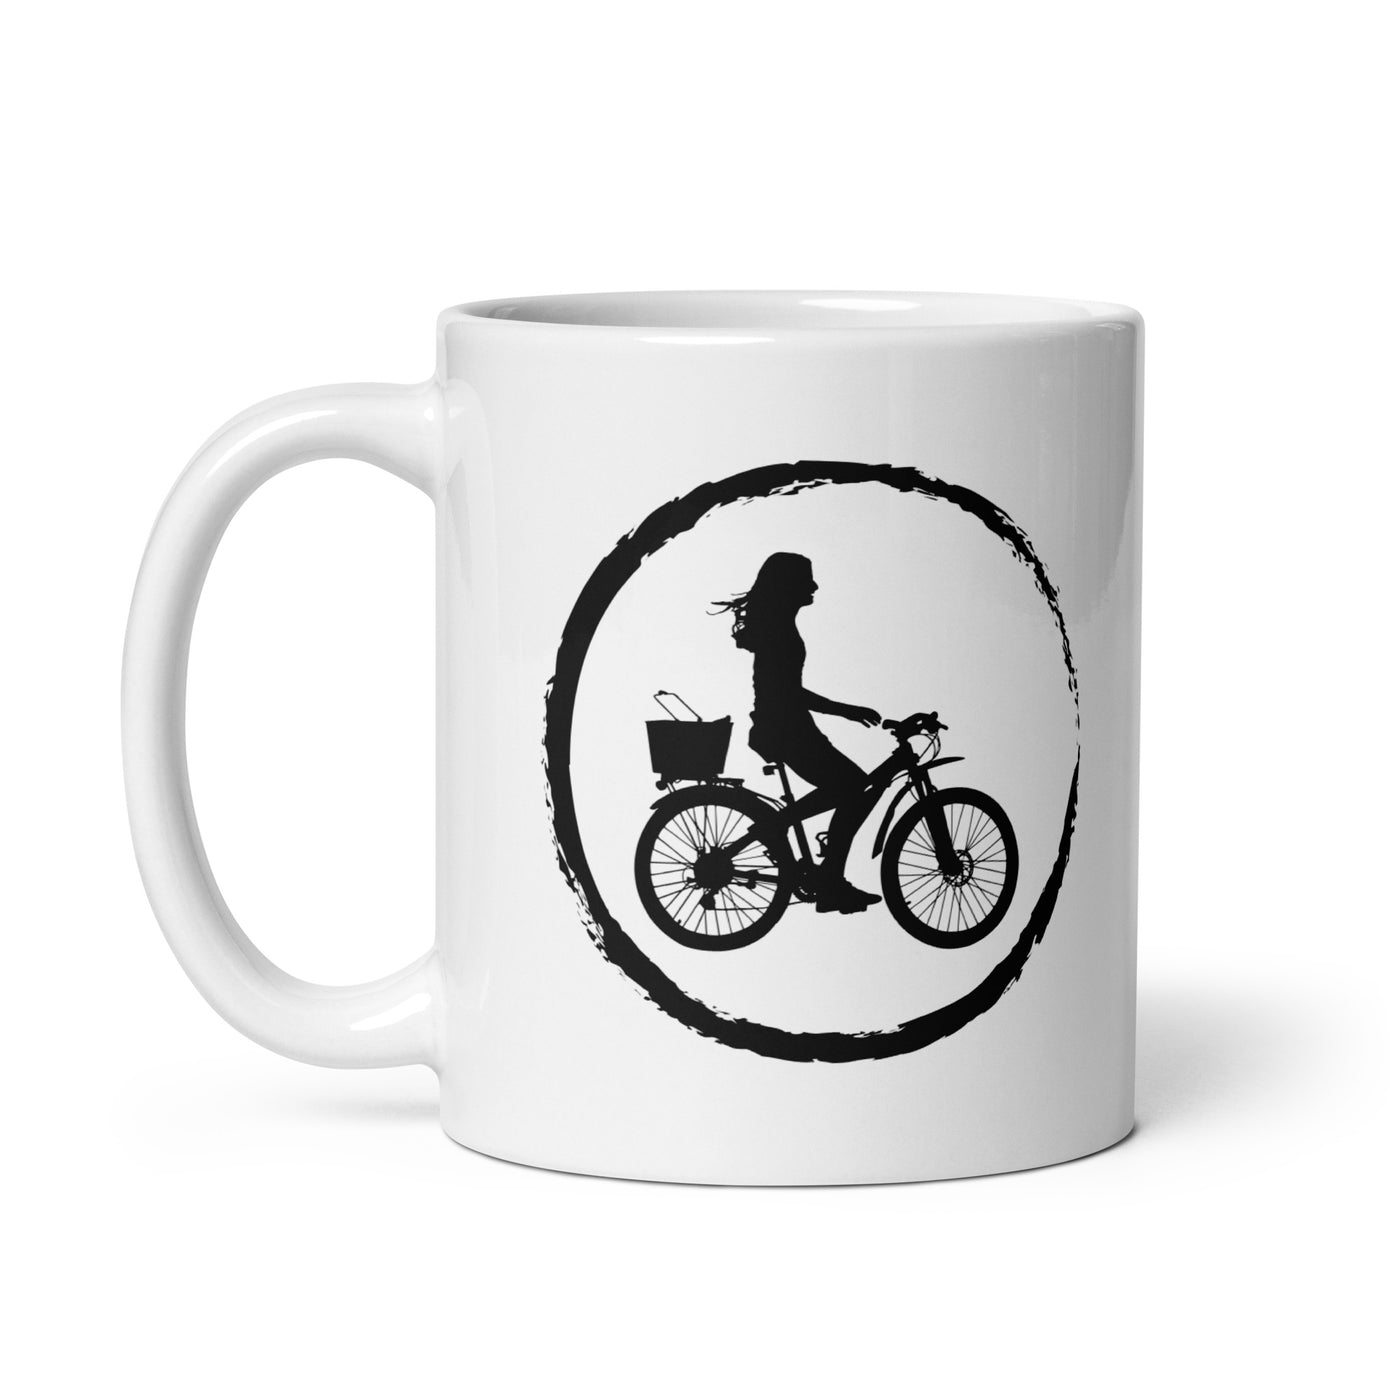 Cricle And Cycling - Tasse fahrrad 11oz